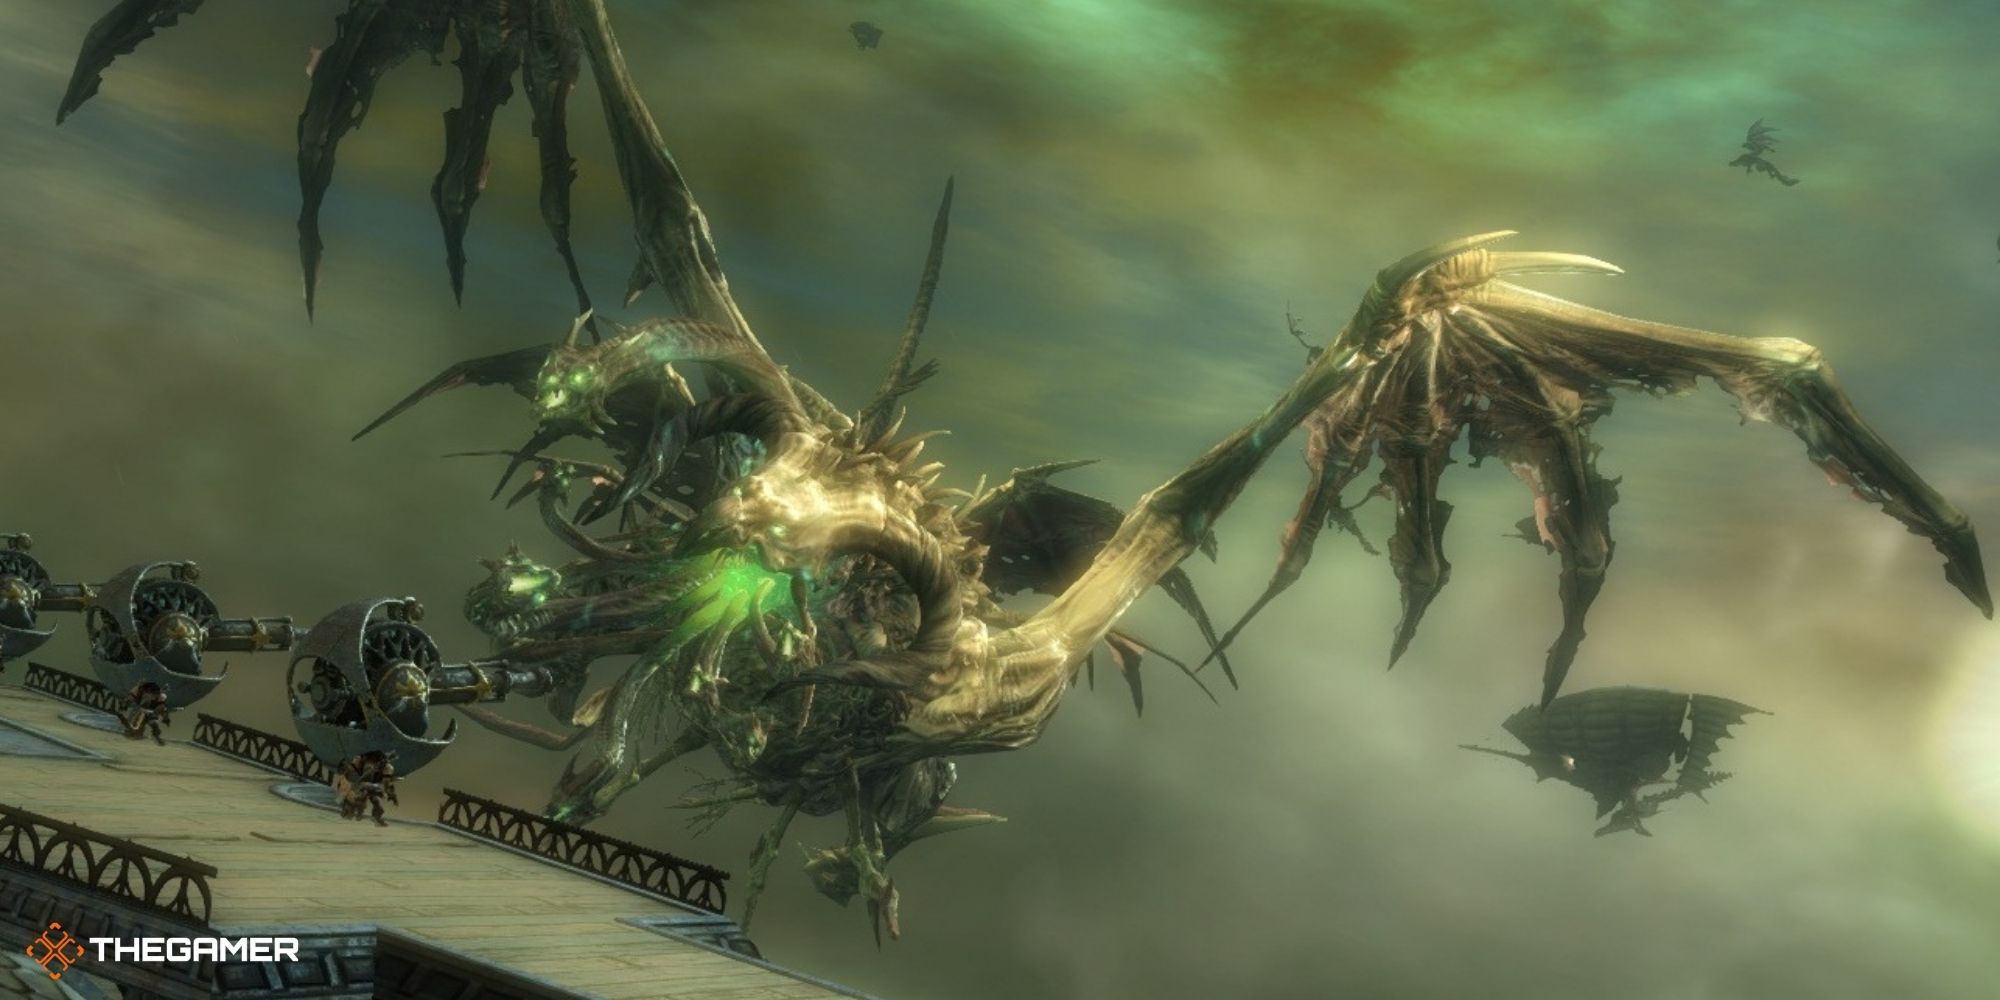 Guild Wars 2 - Zhaitan flying in the air and attacking an airship